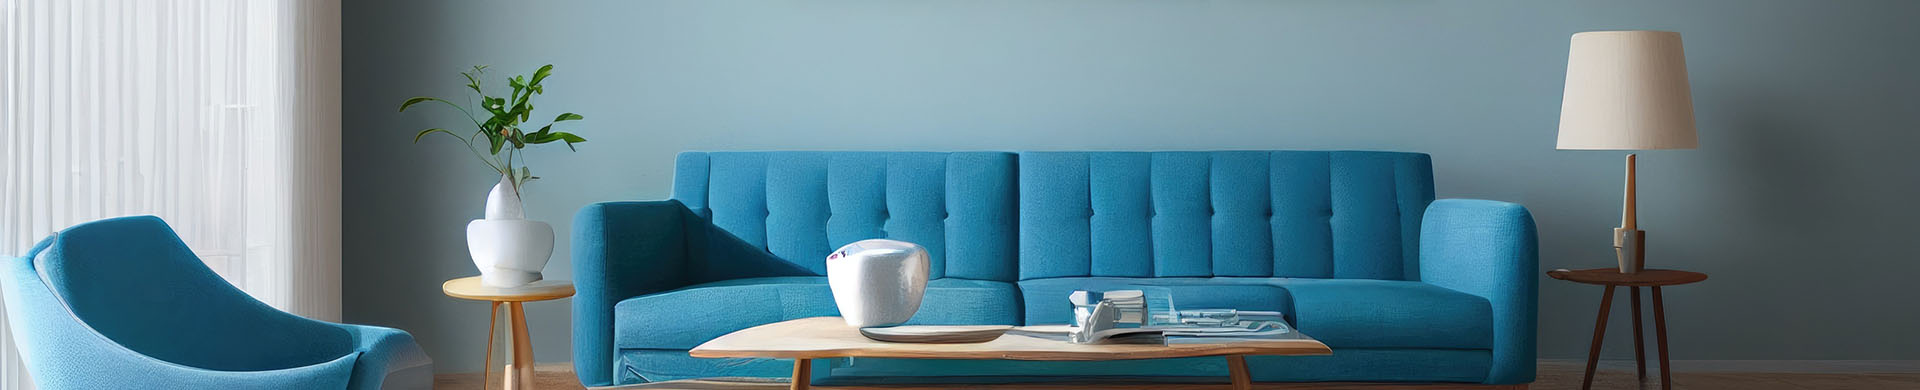 Blue Sofa in Front of Blue Accent Wall